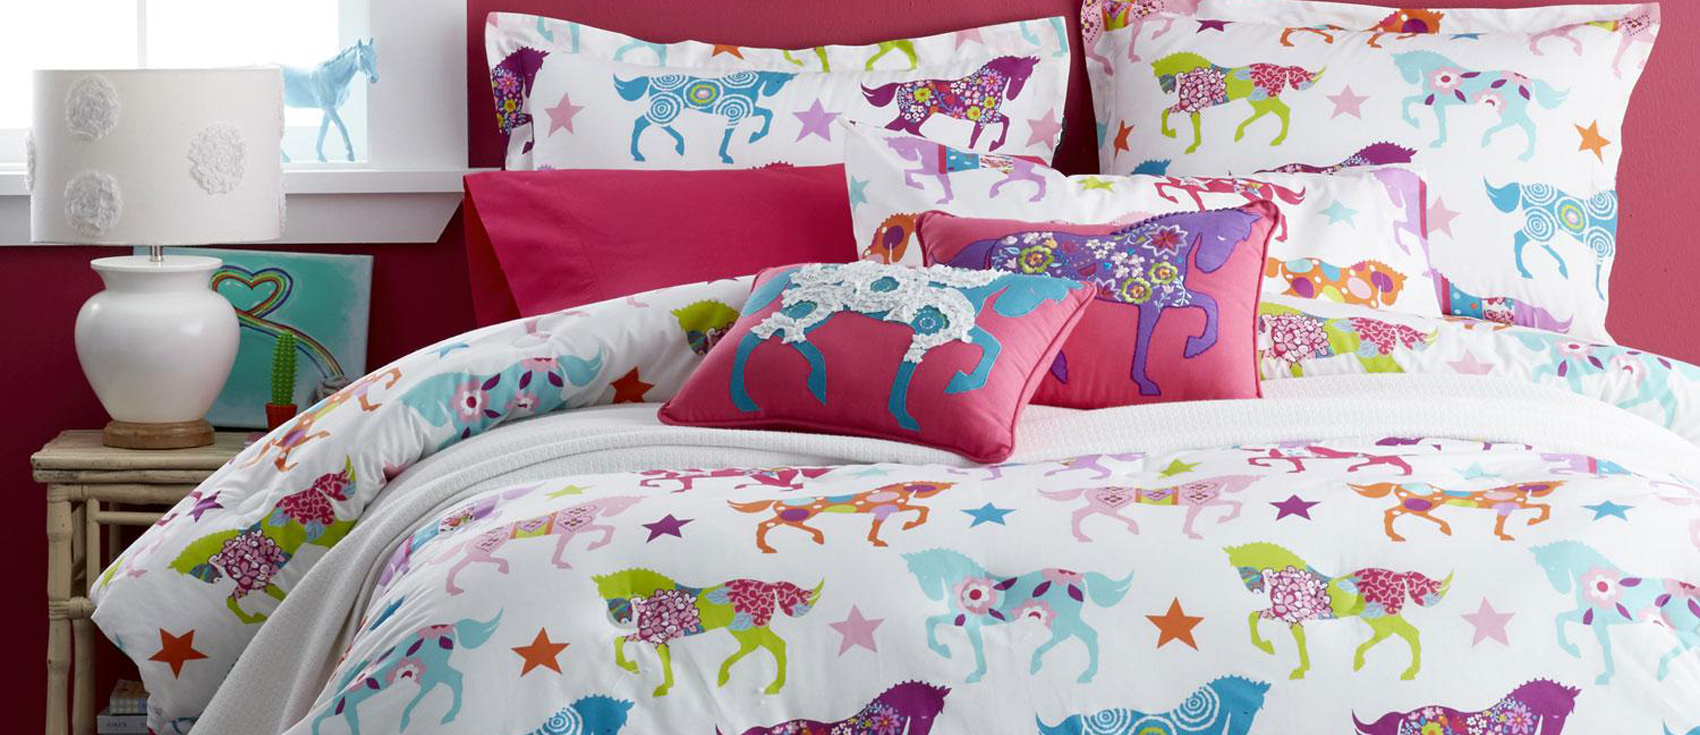 Girls Horse Bedding | How to Design a Cowgirl Theme Bedroom